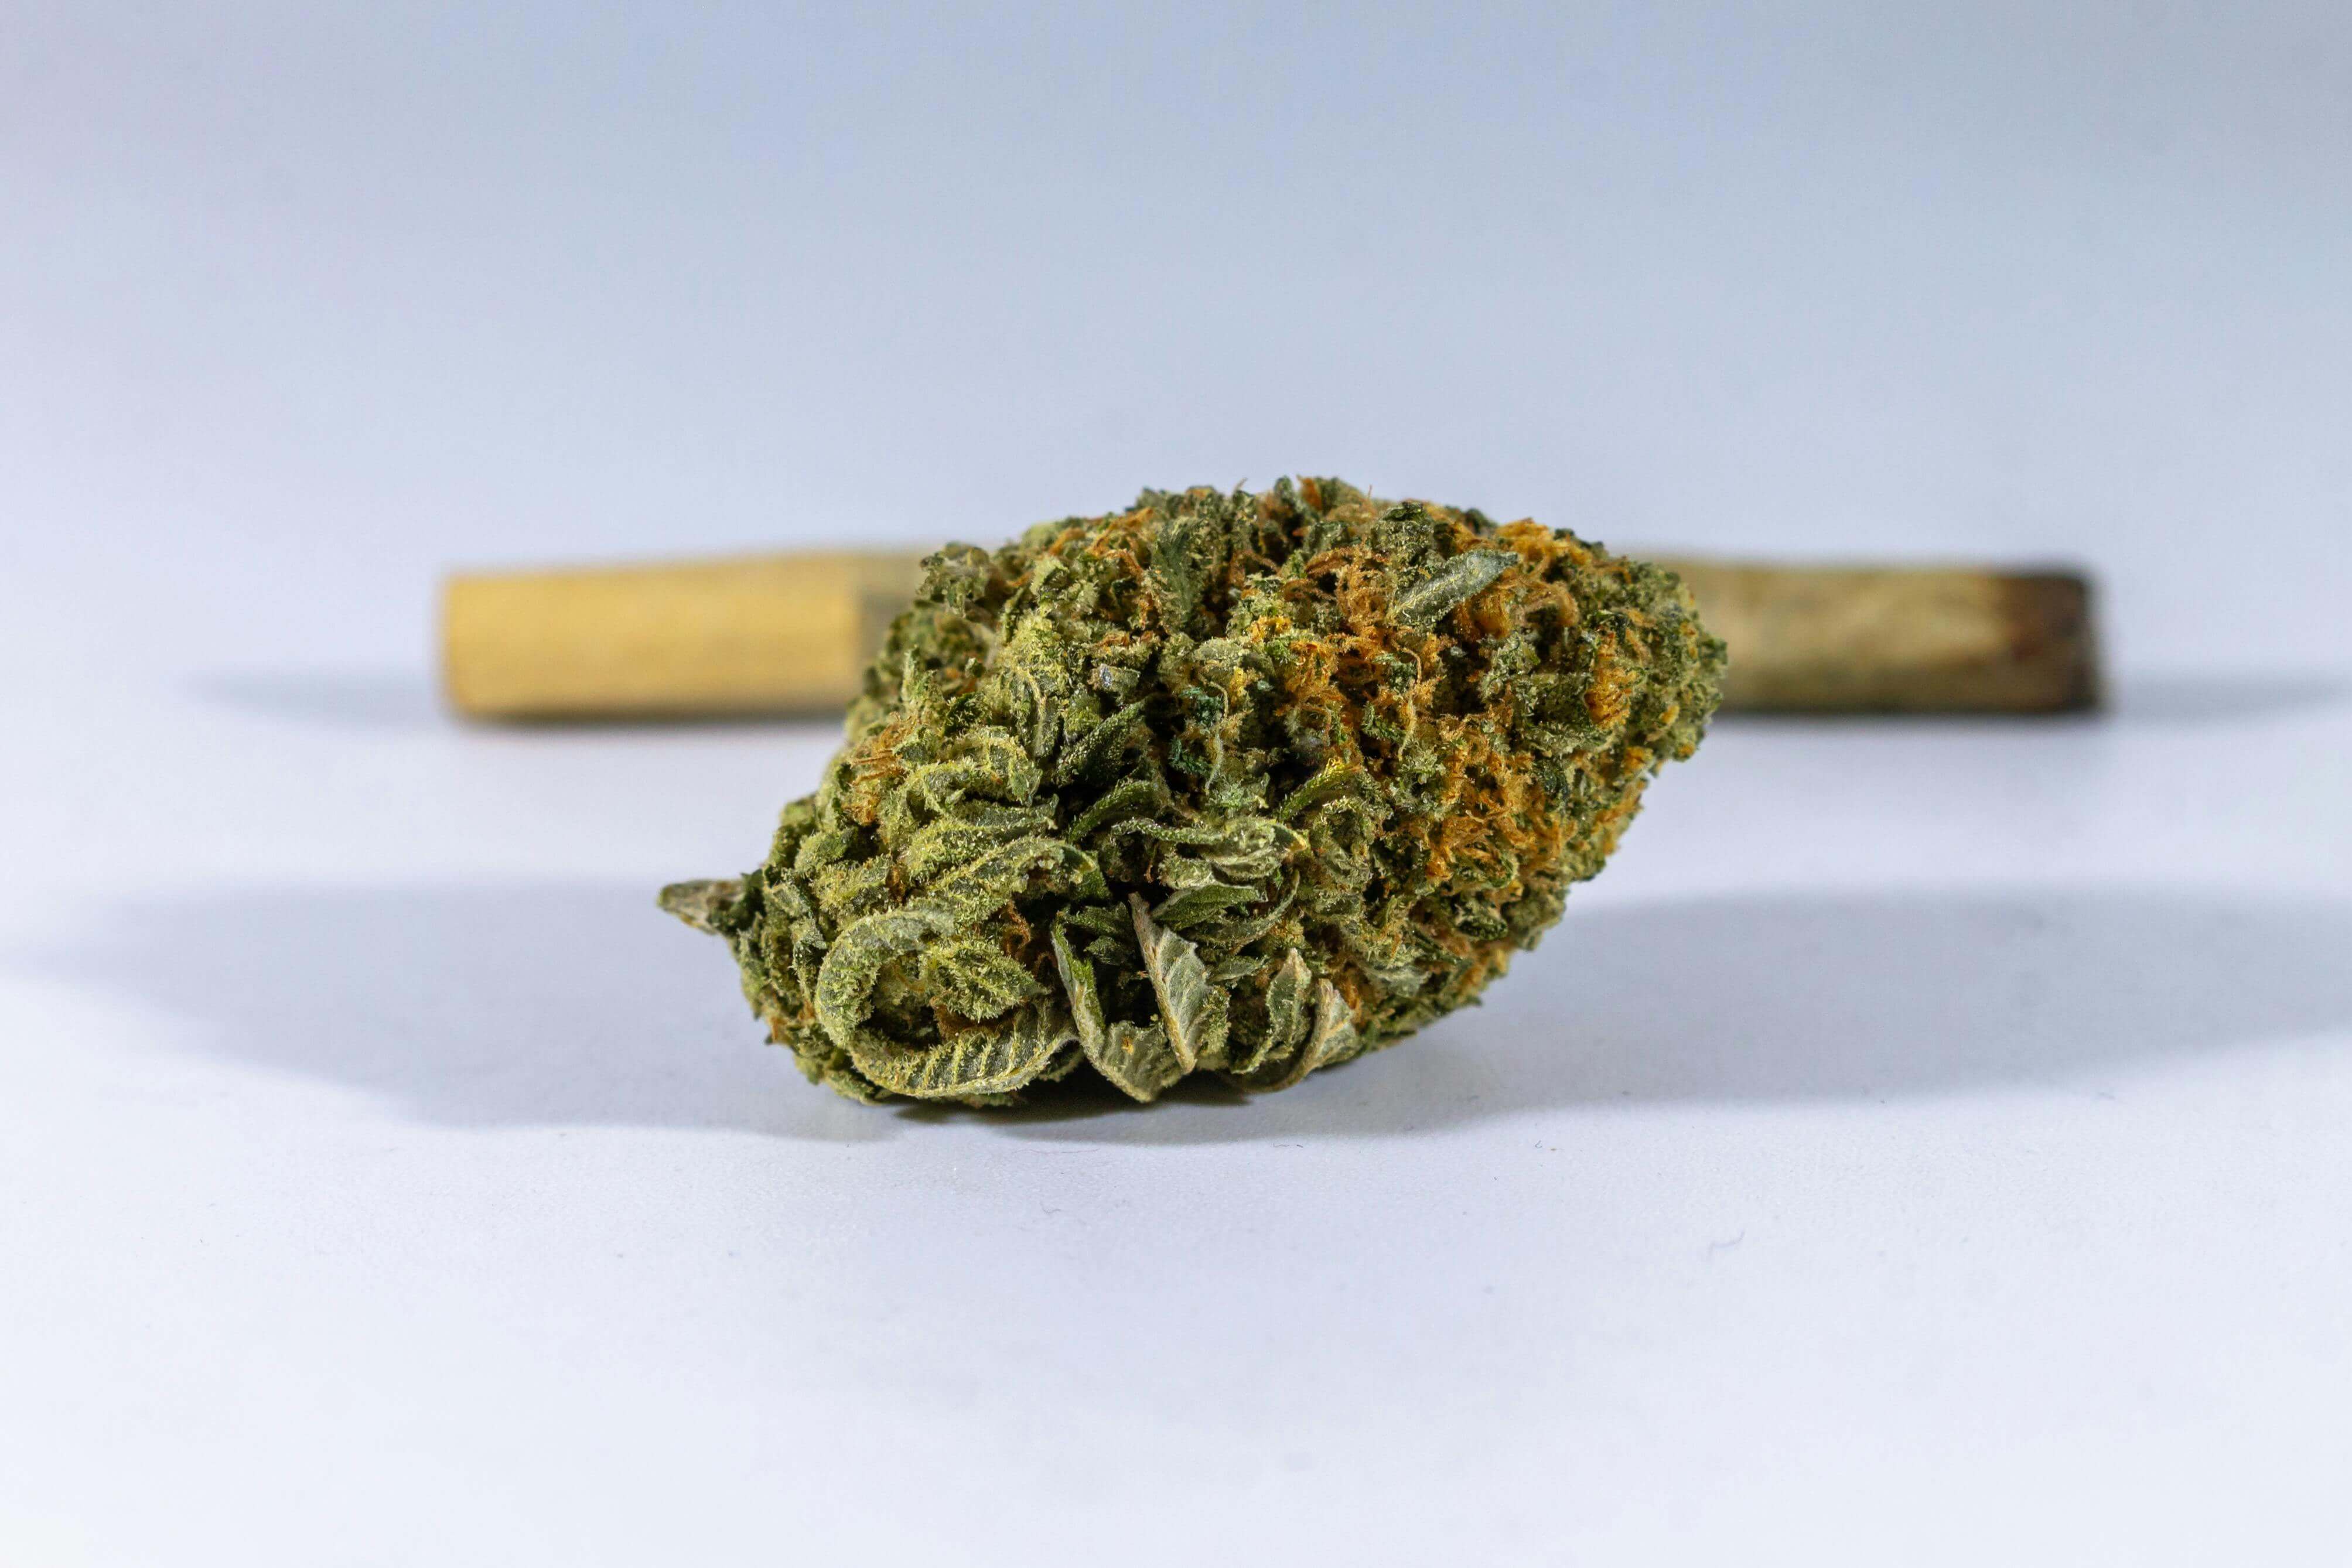 A joint placed next to a cannabis bud